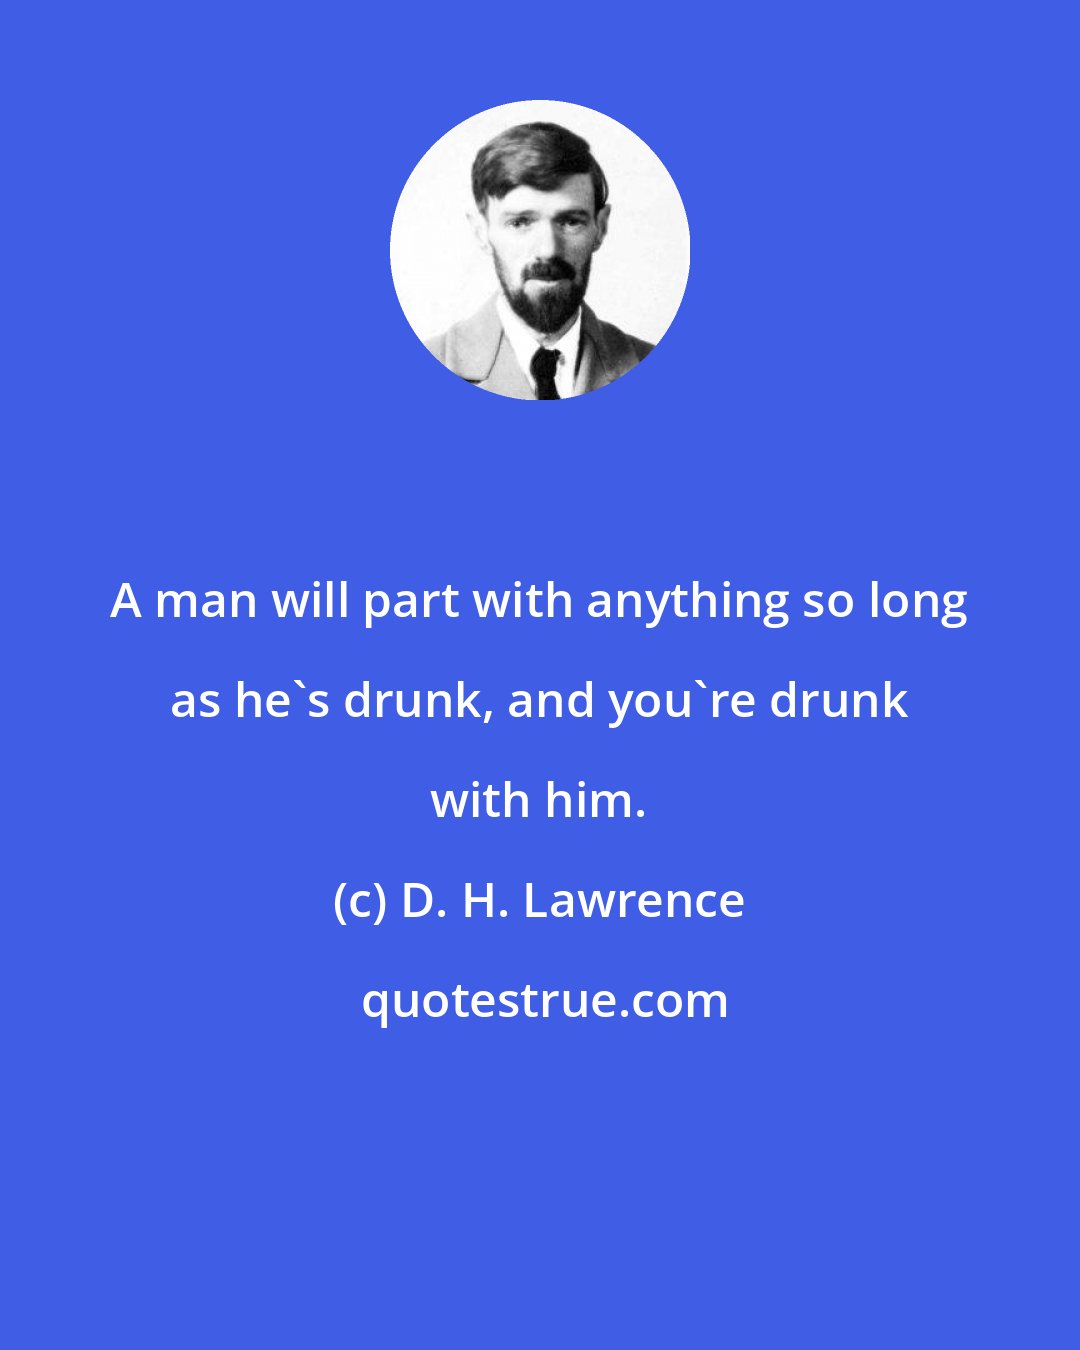 D. H. Lawrence: A man will part with anything so long as he's drunk, and you're drunk with him.